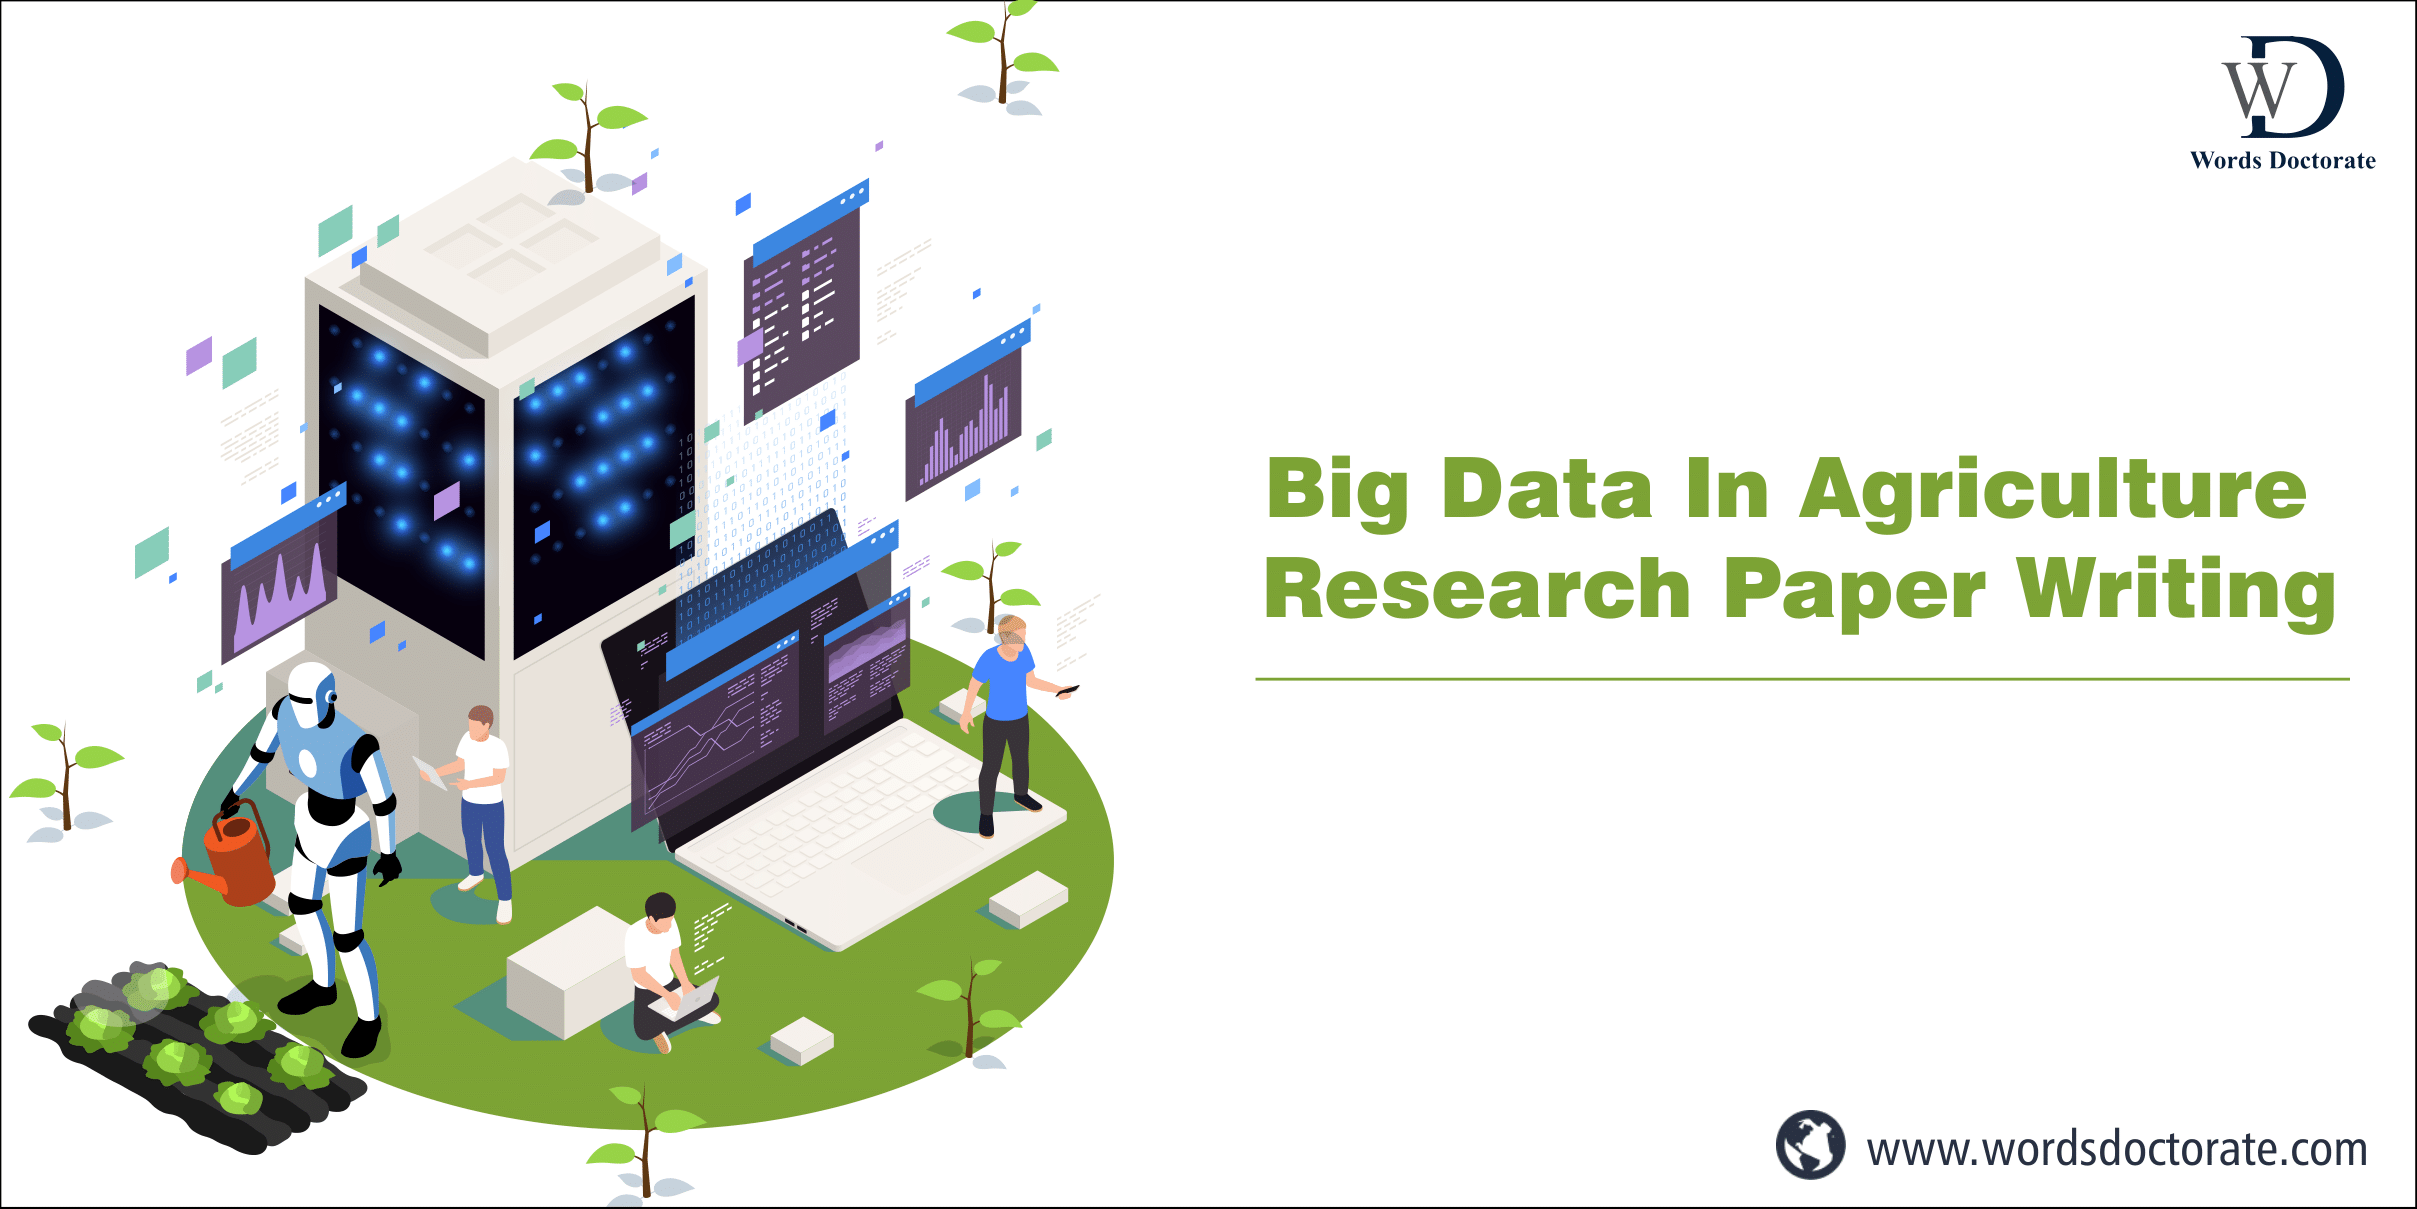 Big Data In Agriculture Research Paper Writing